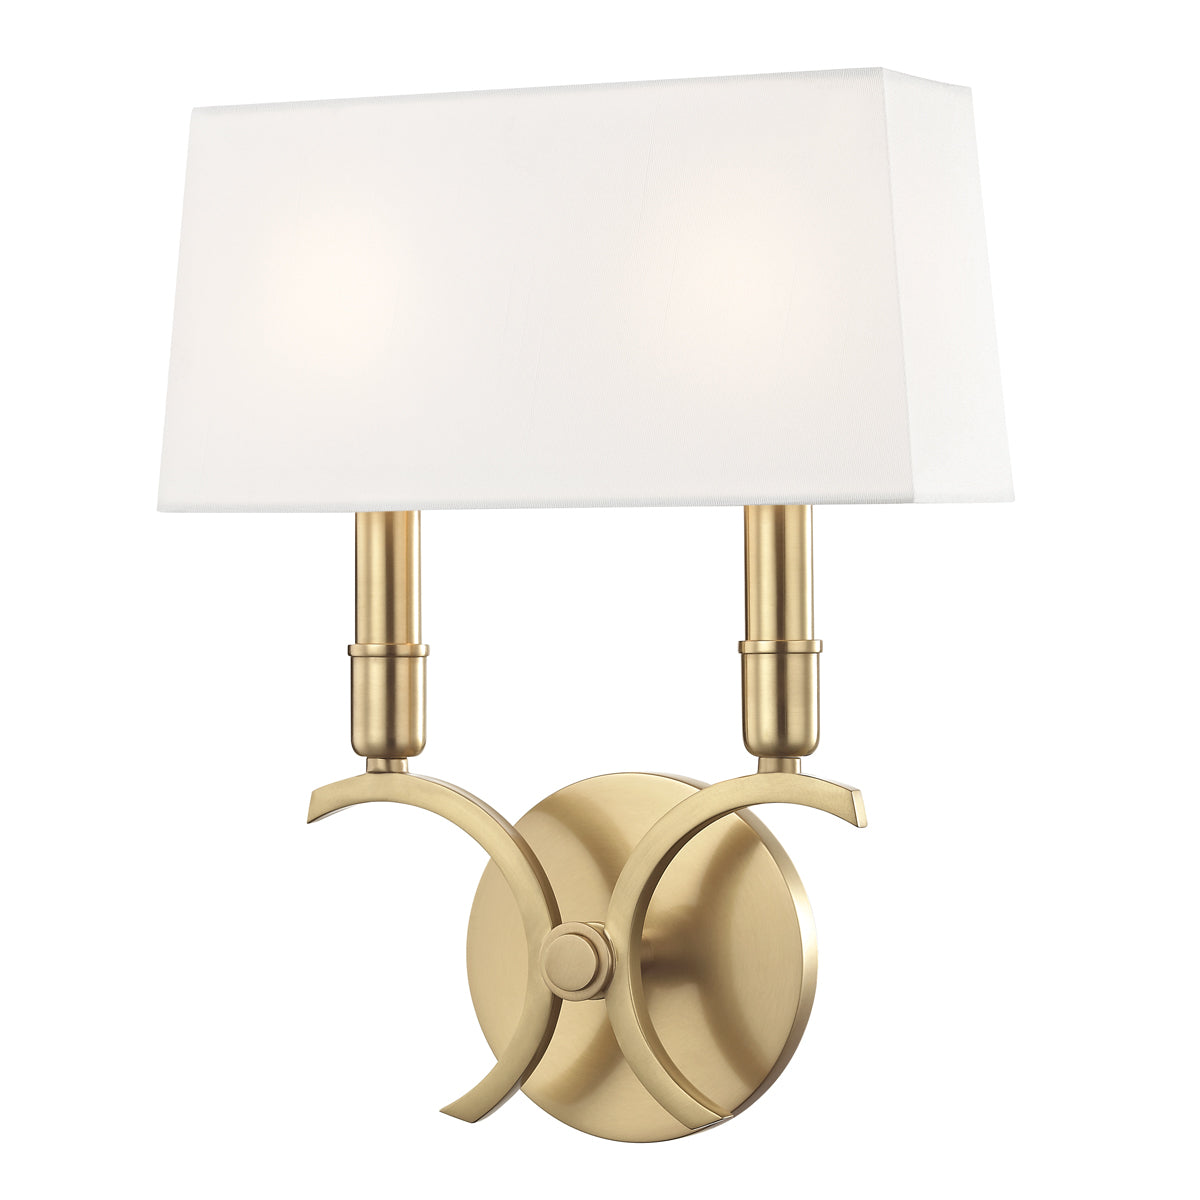 GWEN WALL SCONCE H212102S-AGB-CE Hudson Valley Lighting